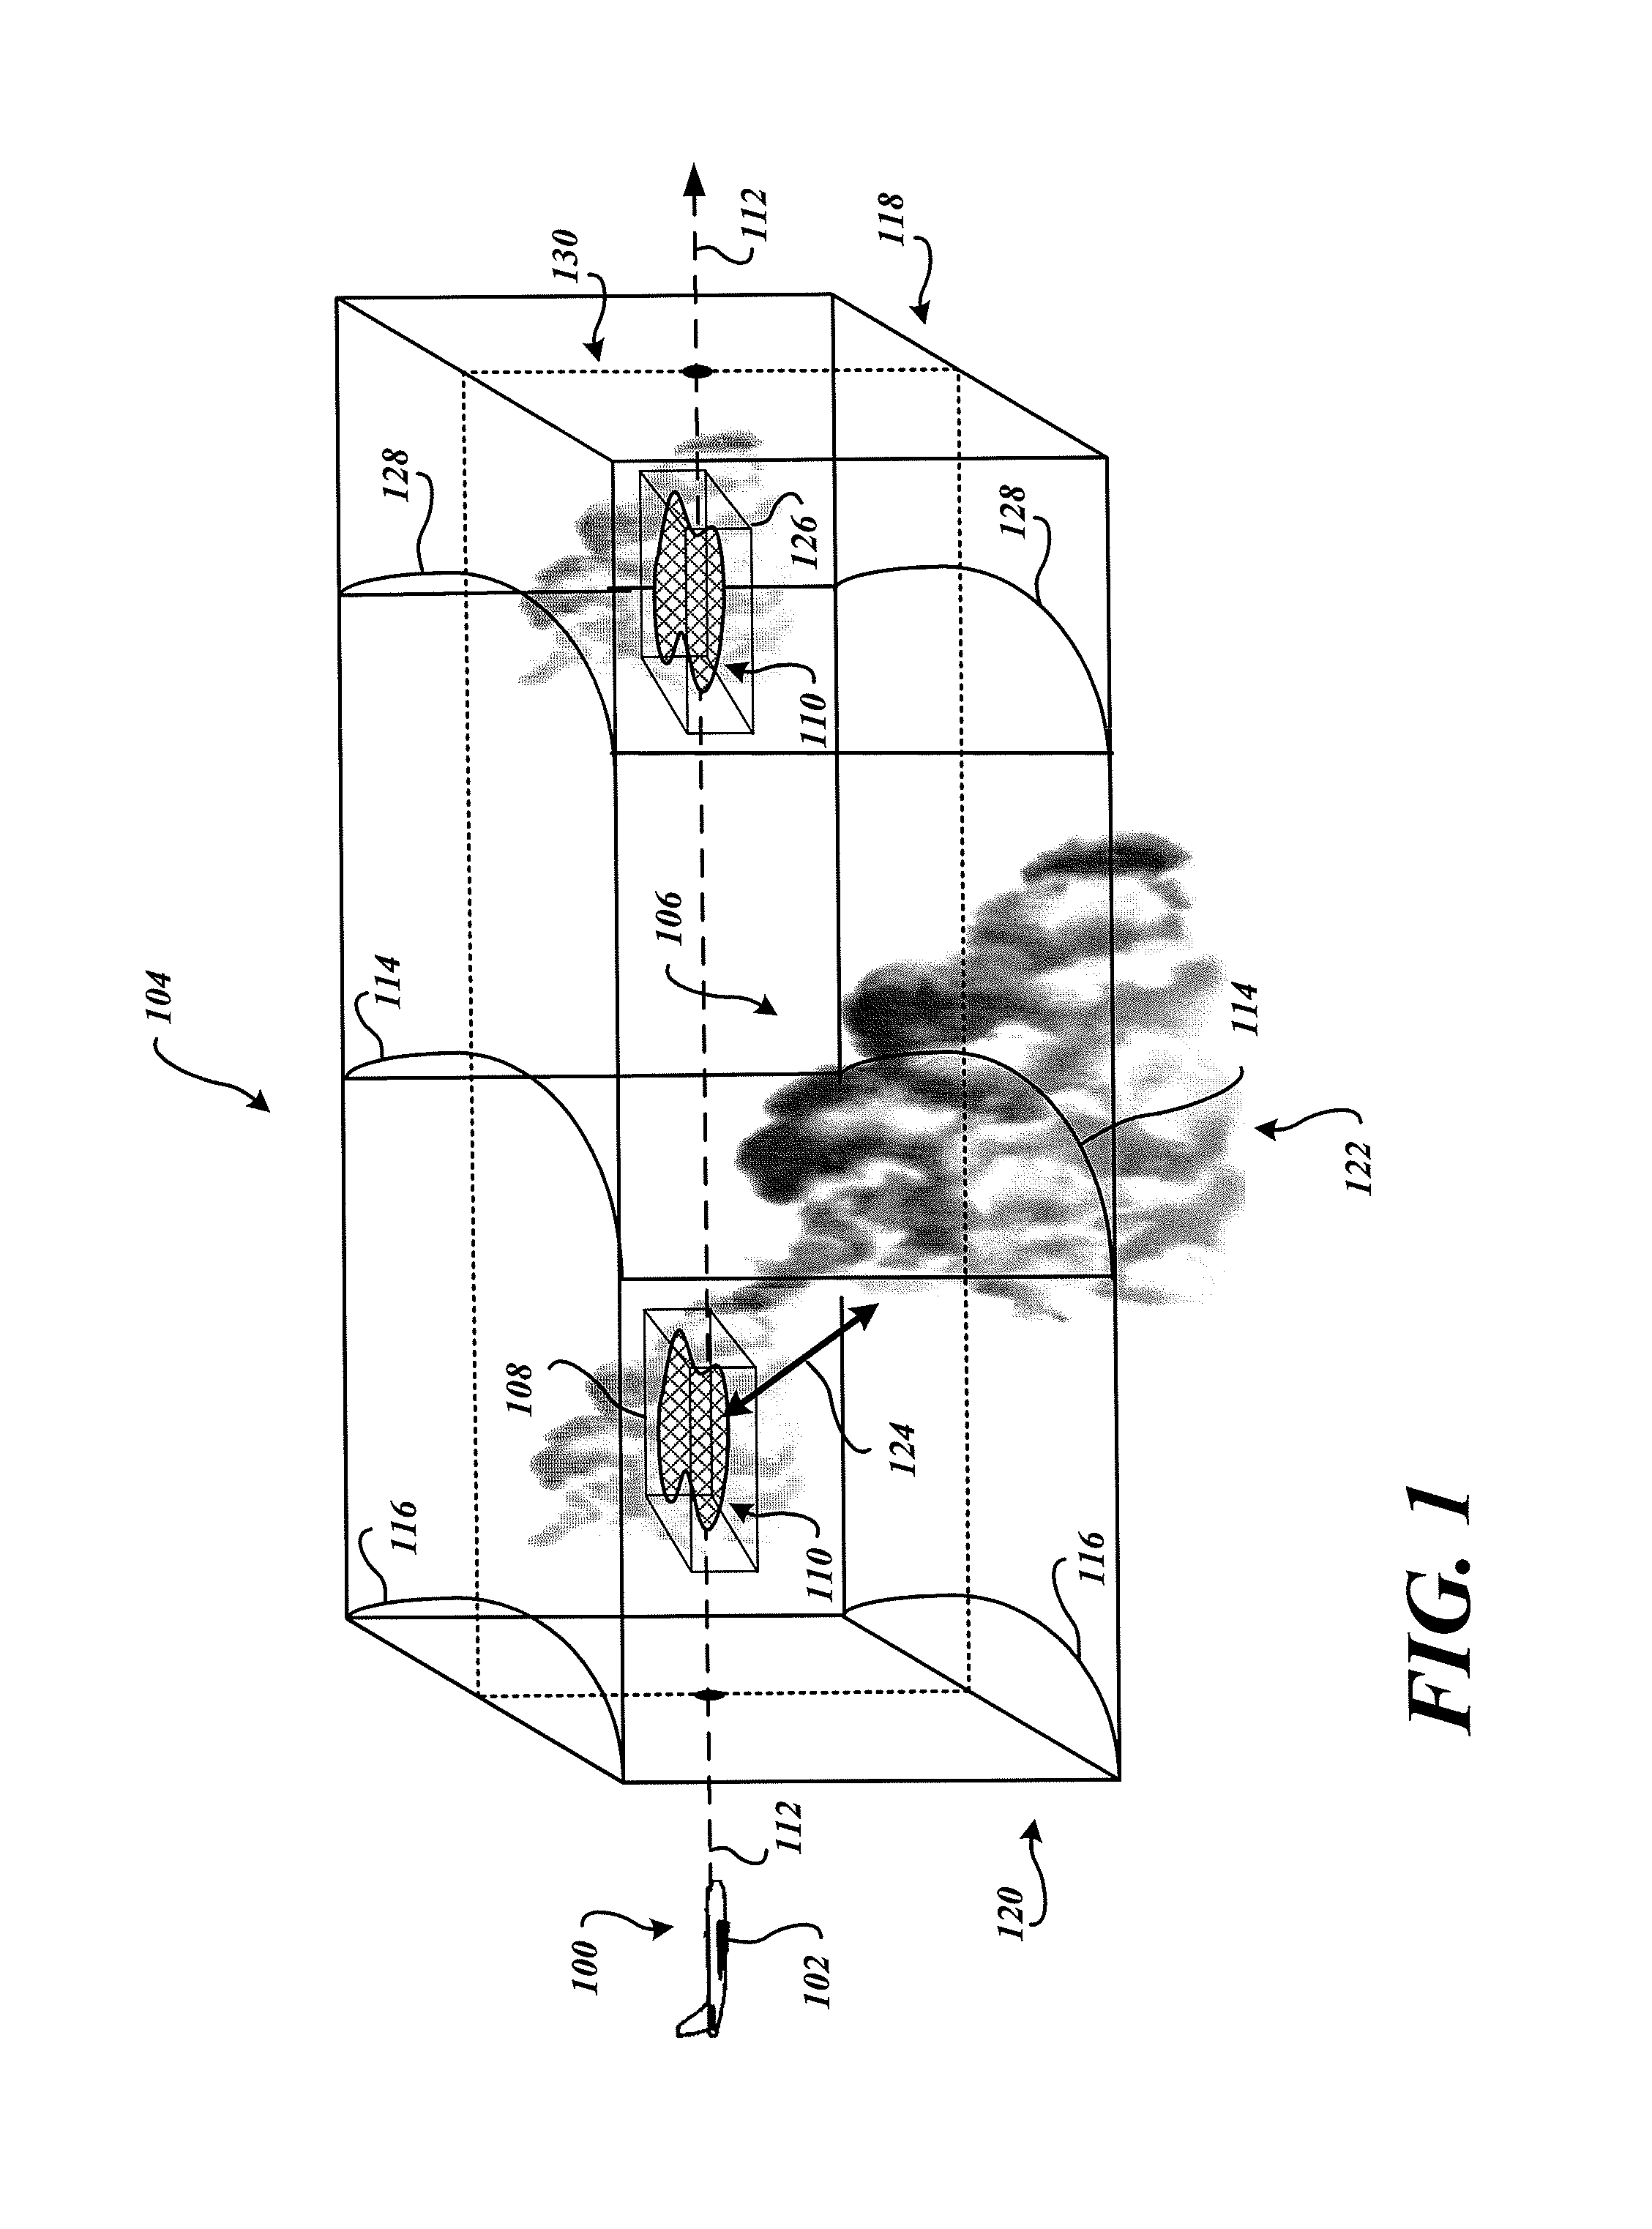 System and method to identify regions of airspace having ice crystals using an onboard weather radar system